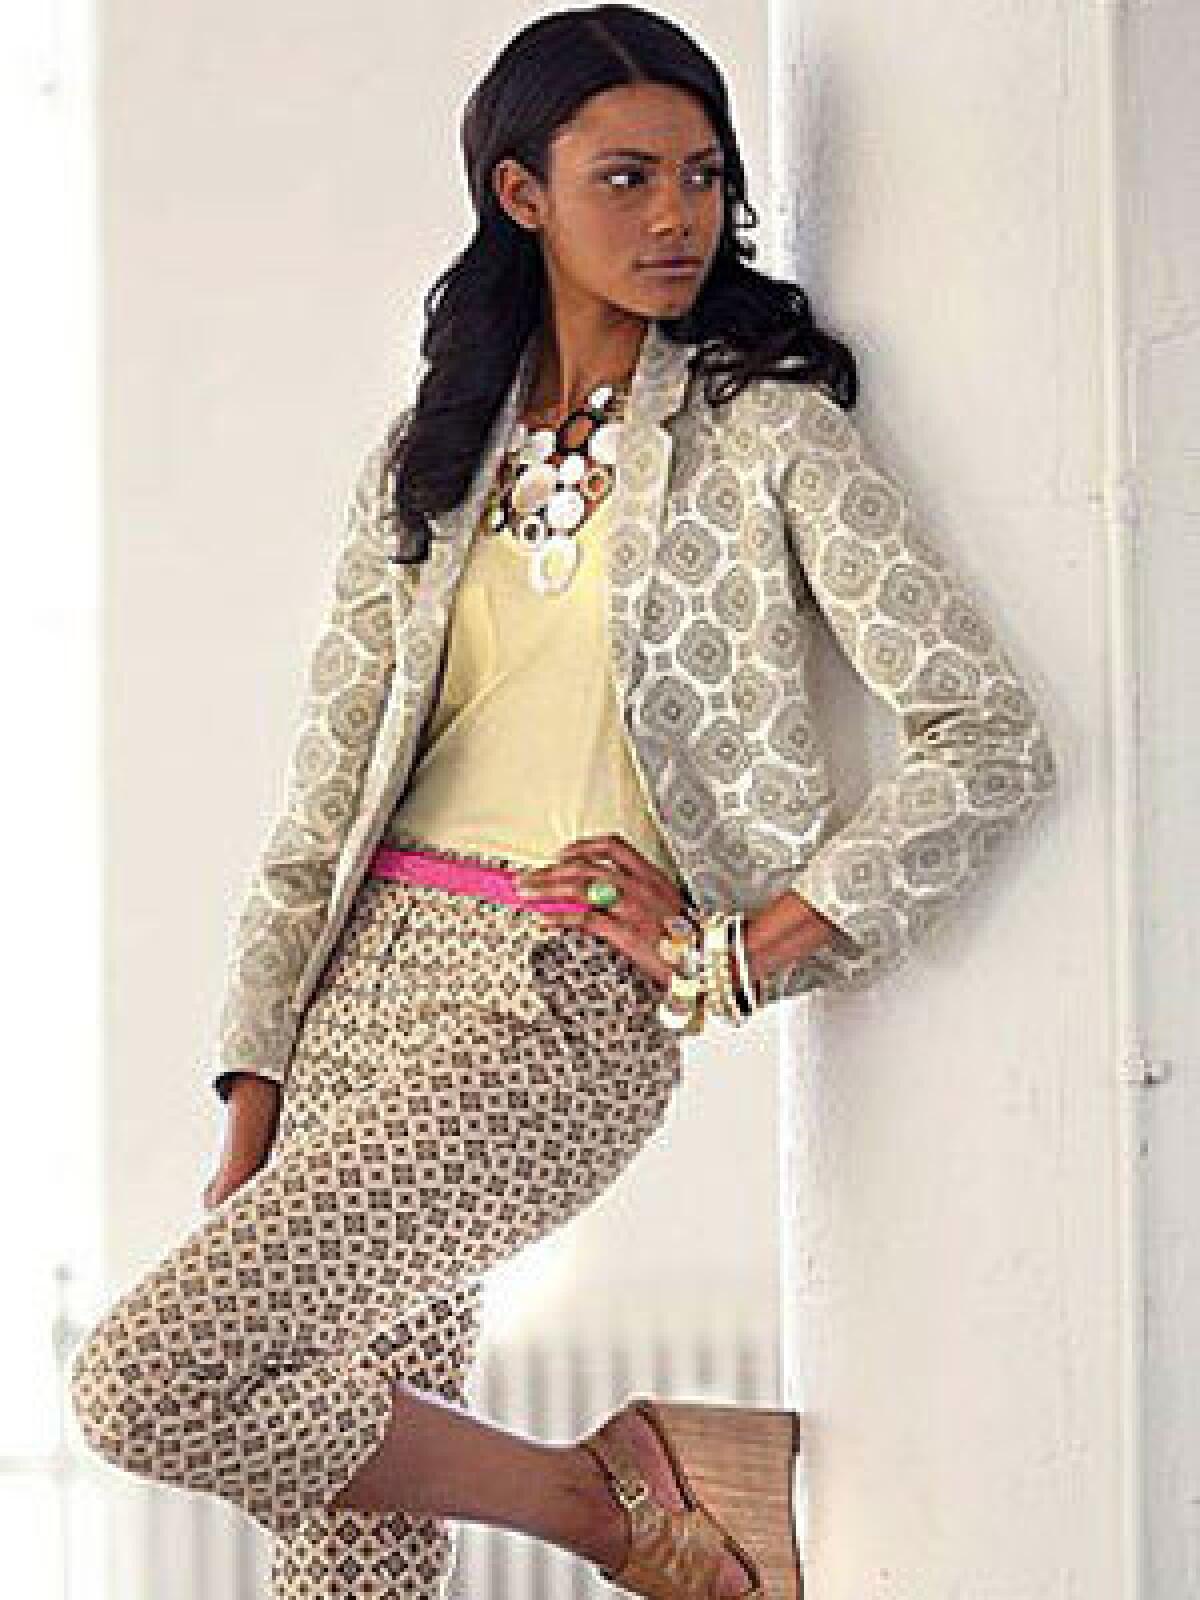 HOLIDAY IN THE SUN: J. Crew blazer, $250 at jcrew.com; Talbots pants, $49 at talbots.com; Bordeaux tank top, $46 at Sugar, Westlake Village; Emily Noelle belt, $187 at Intermix; H&M necklace, $14.90, and bracelet, $6.90 at H&M Beverly Center; Jessica Elliot ring, $38 at www.skinnystyle.com; Nine West shoes, $89 at ninewest.com.